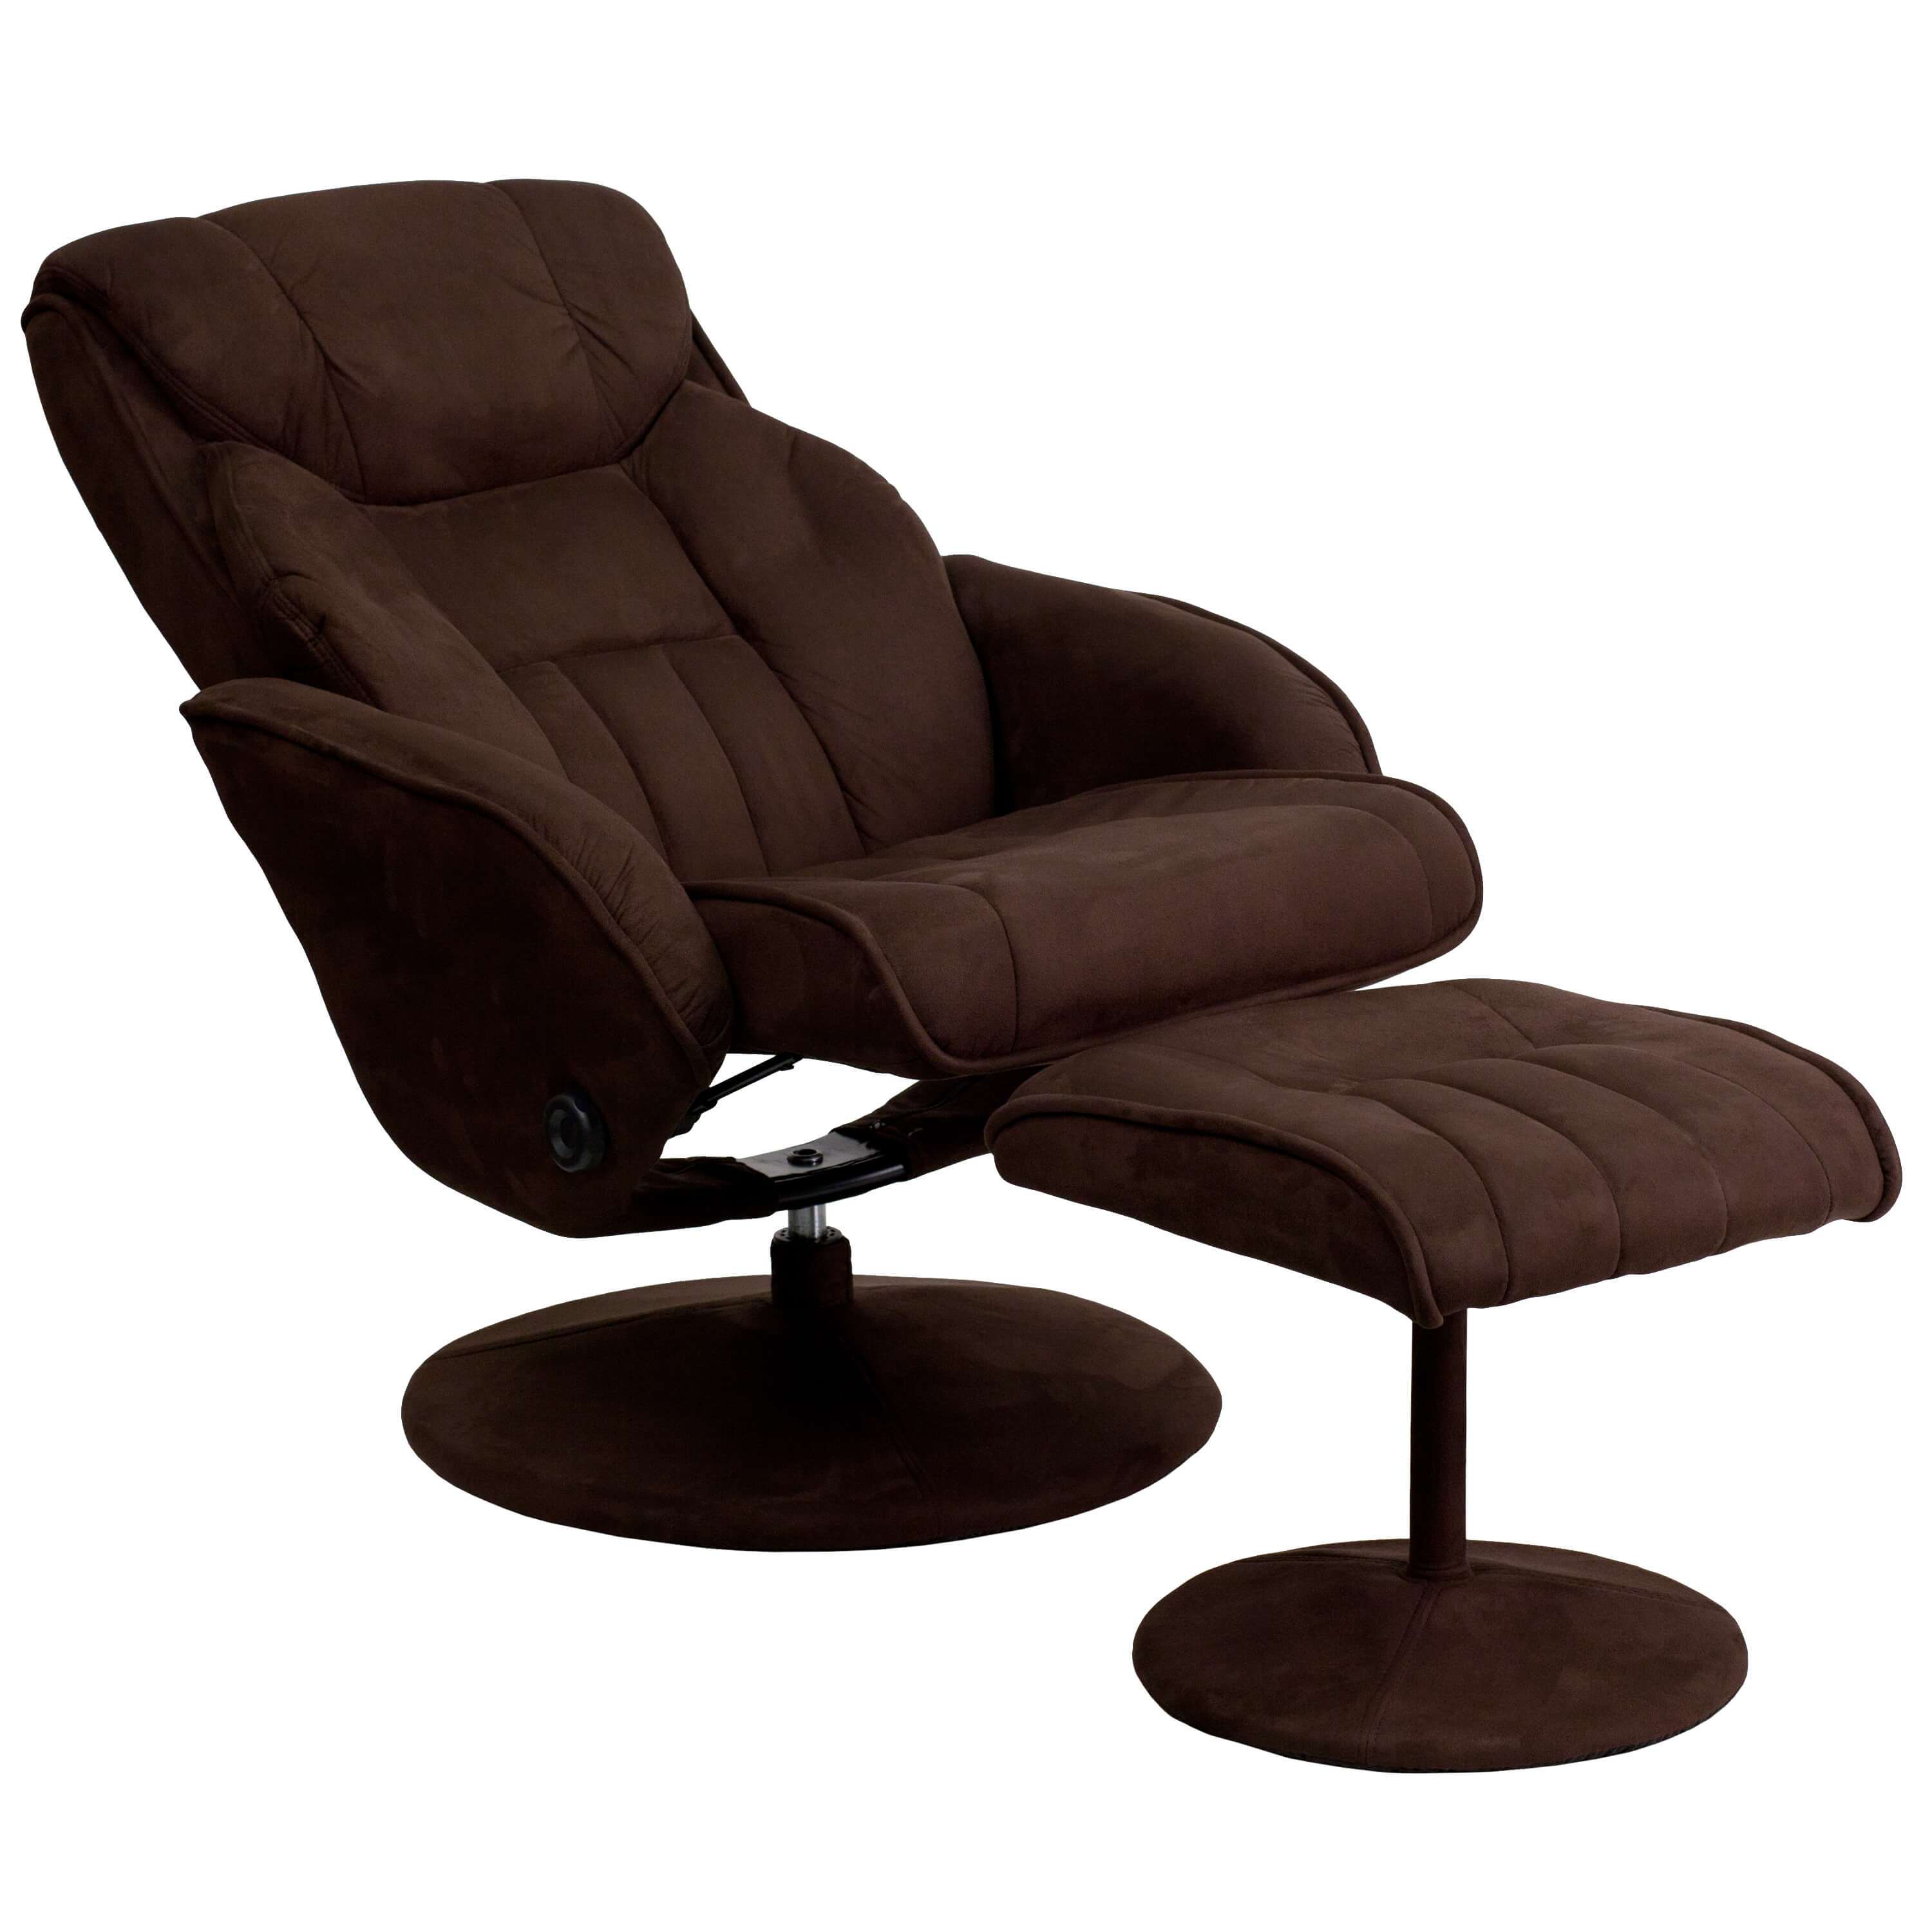 Brown recliner chair reclined view